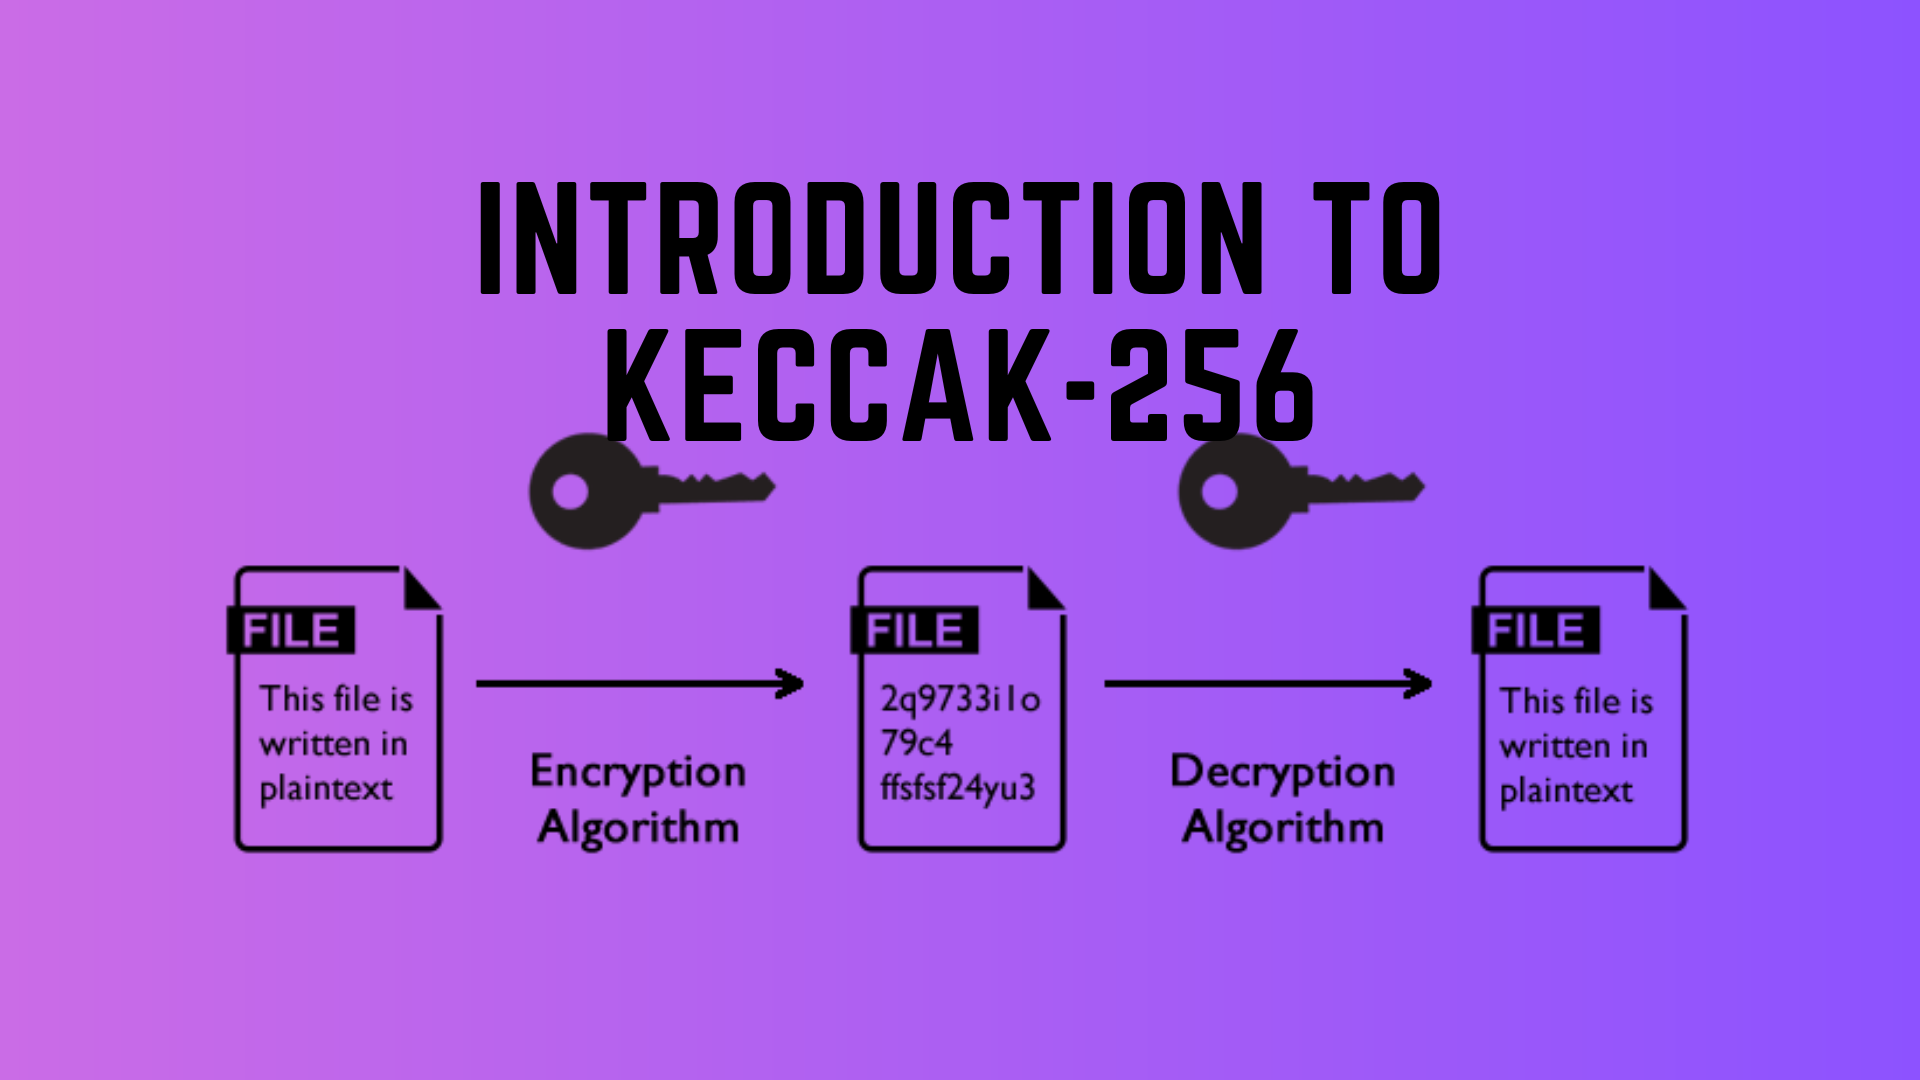 Introduction to KECCAK-256 (1)